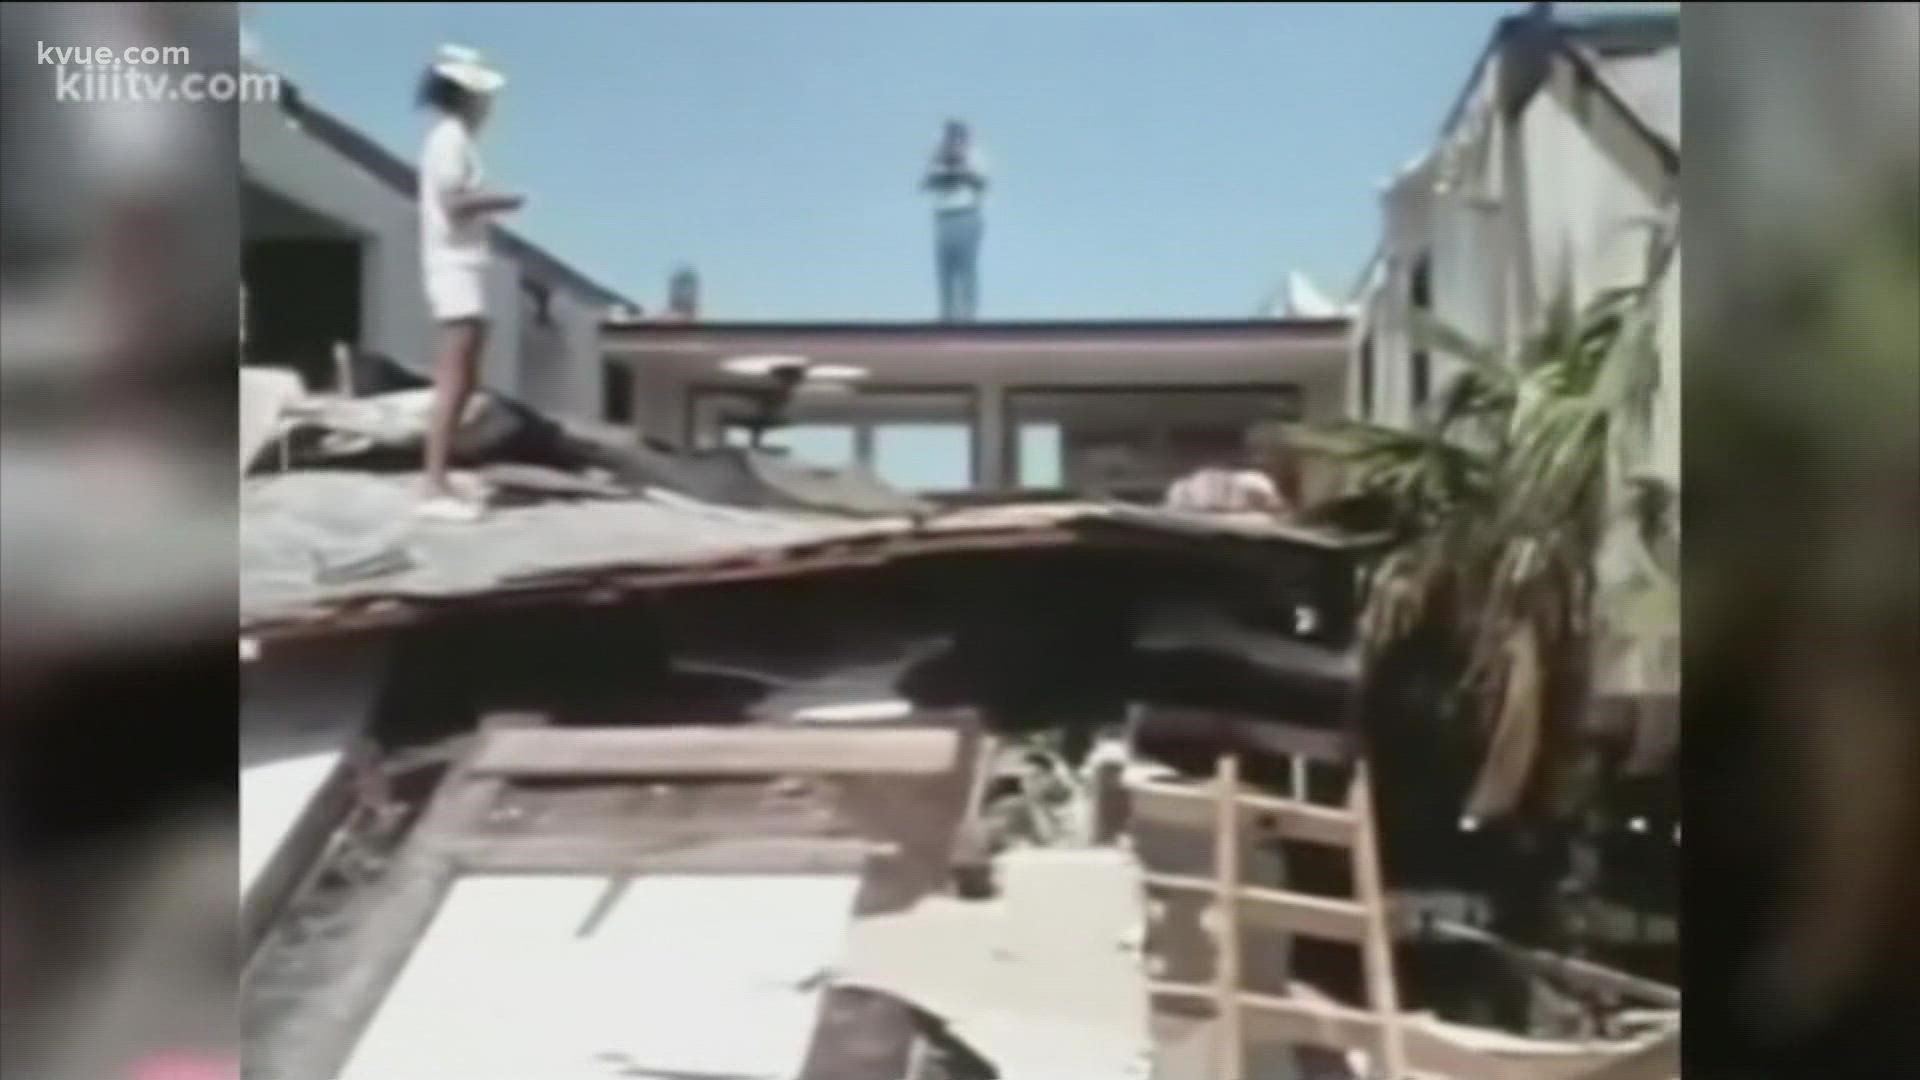 This week in 1970, a violent hurricane slammed into Corpus Christi and communities along Texas' Coastal Bend